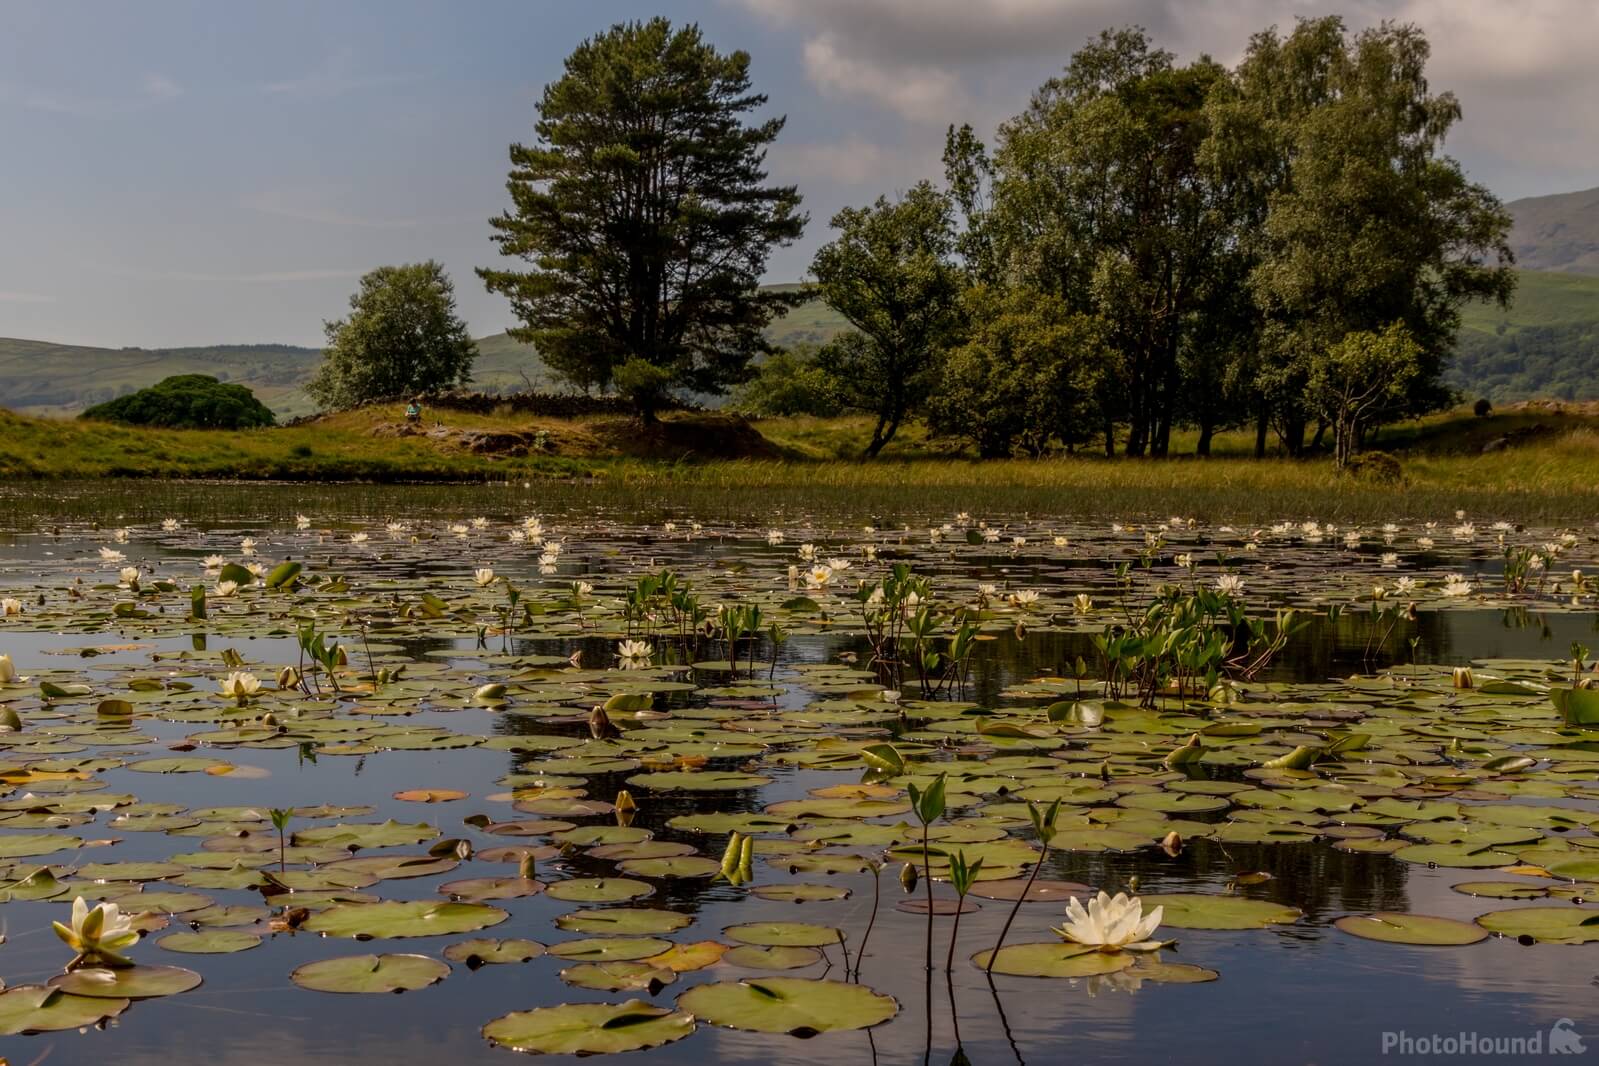 Image of Kelly Hall Tarn by Andy Killingbeck